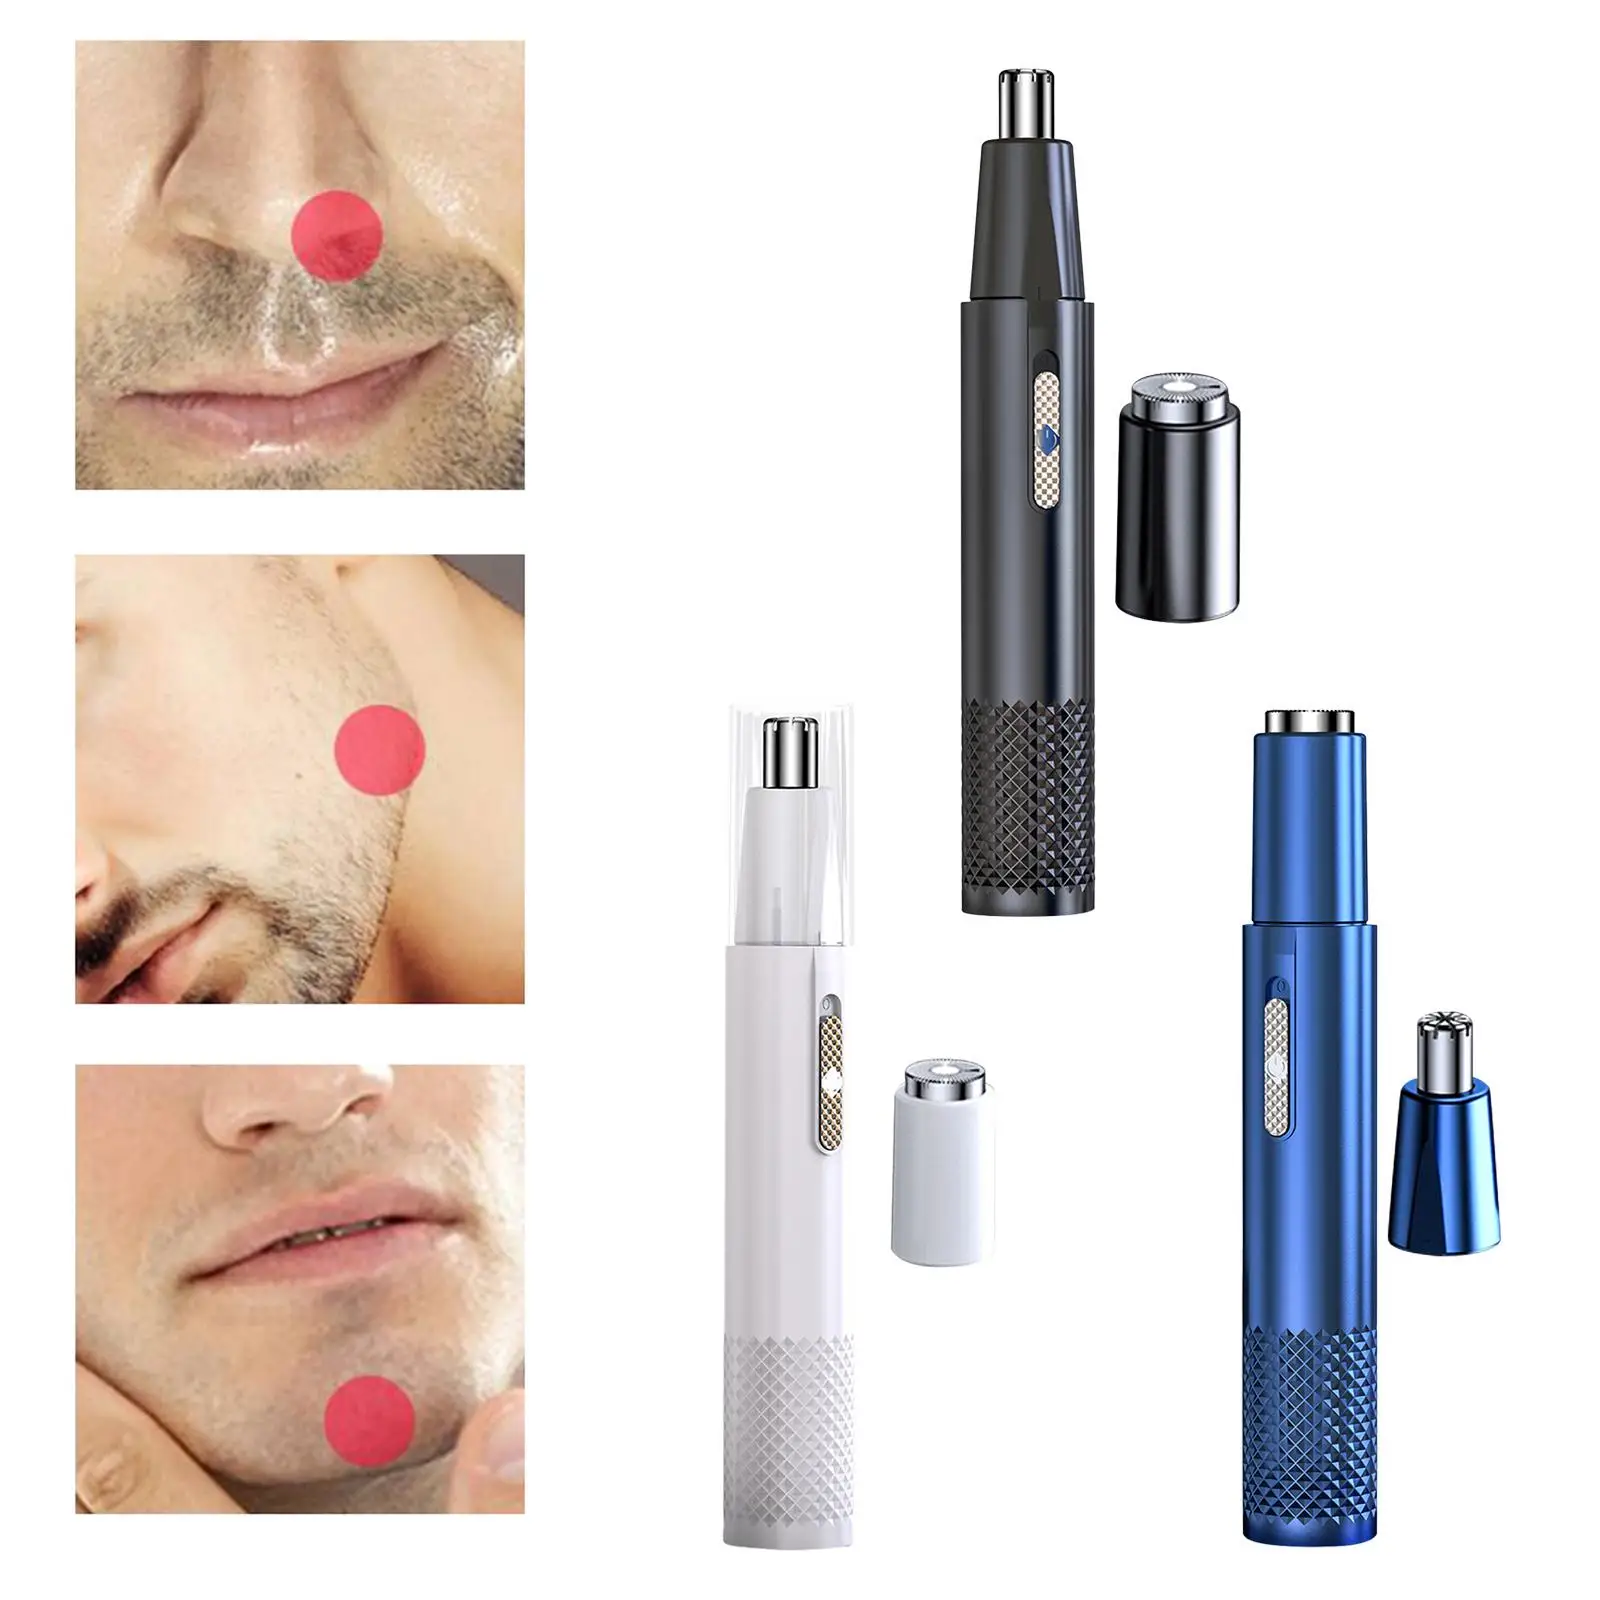 Nose Hair Rechargeable Easy to Clean for Travel Nose Hair Shaver